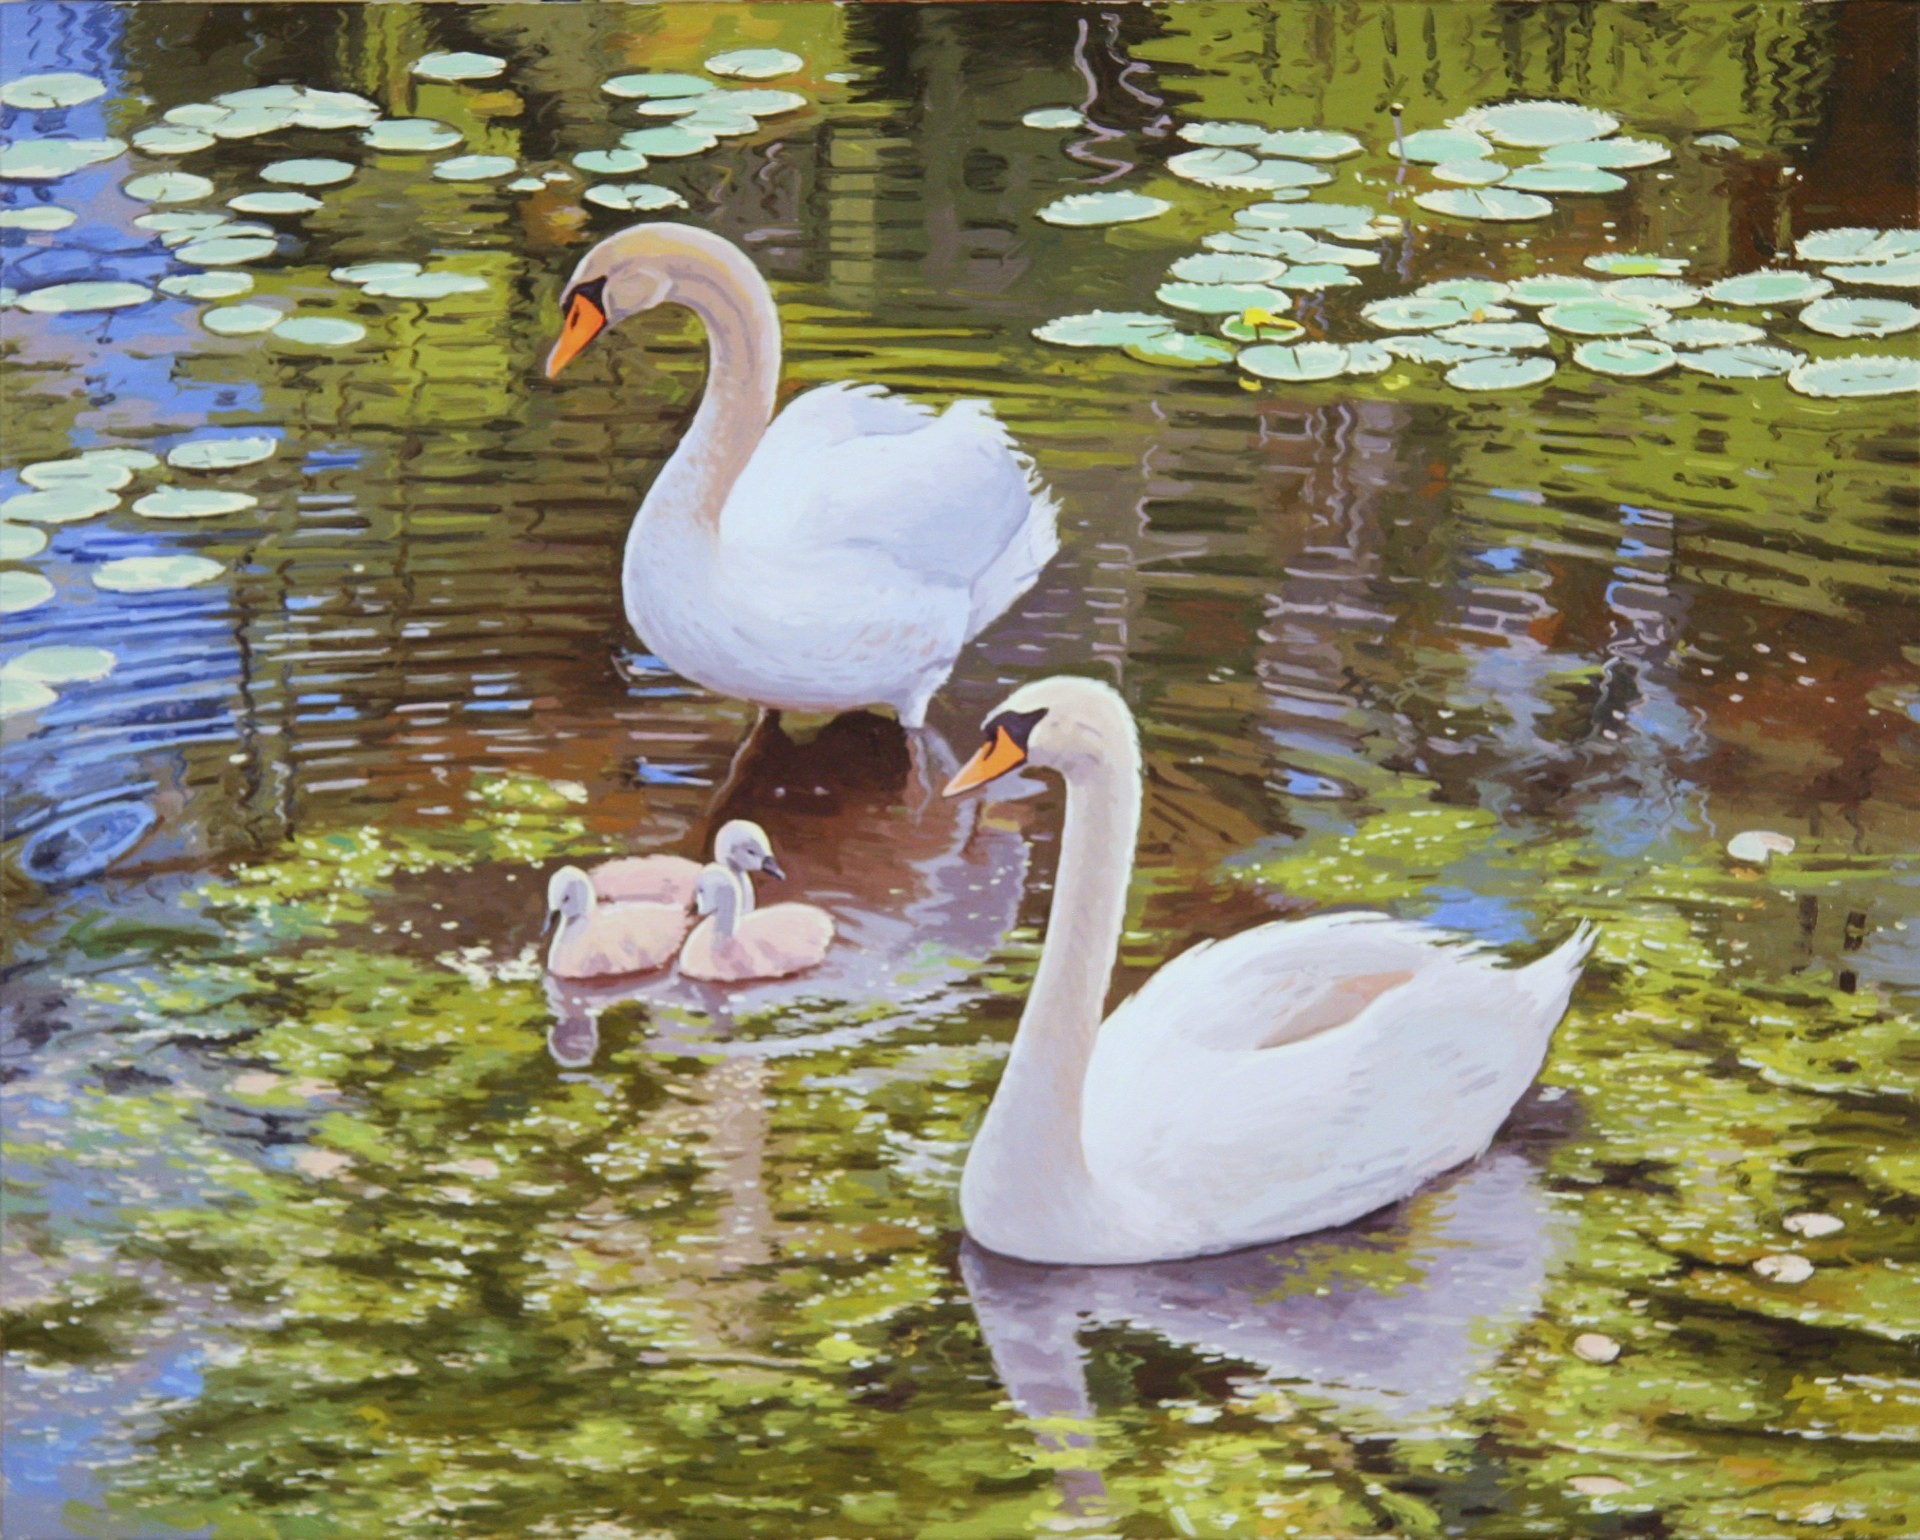 PleinAir Salon Online Art Competition February 2023 Top 100 Finalist James Wolford Cob, pen and cygnets Swans on Lake Oil Painting